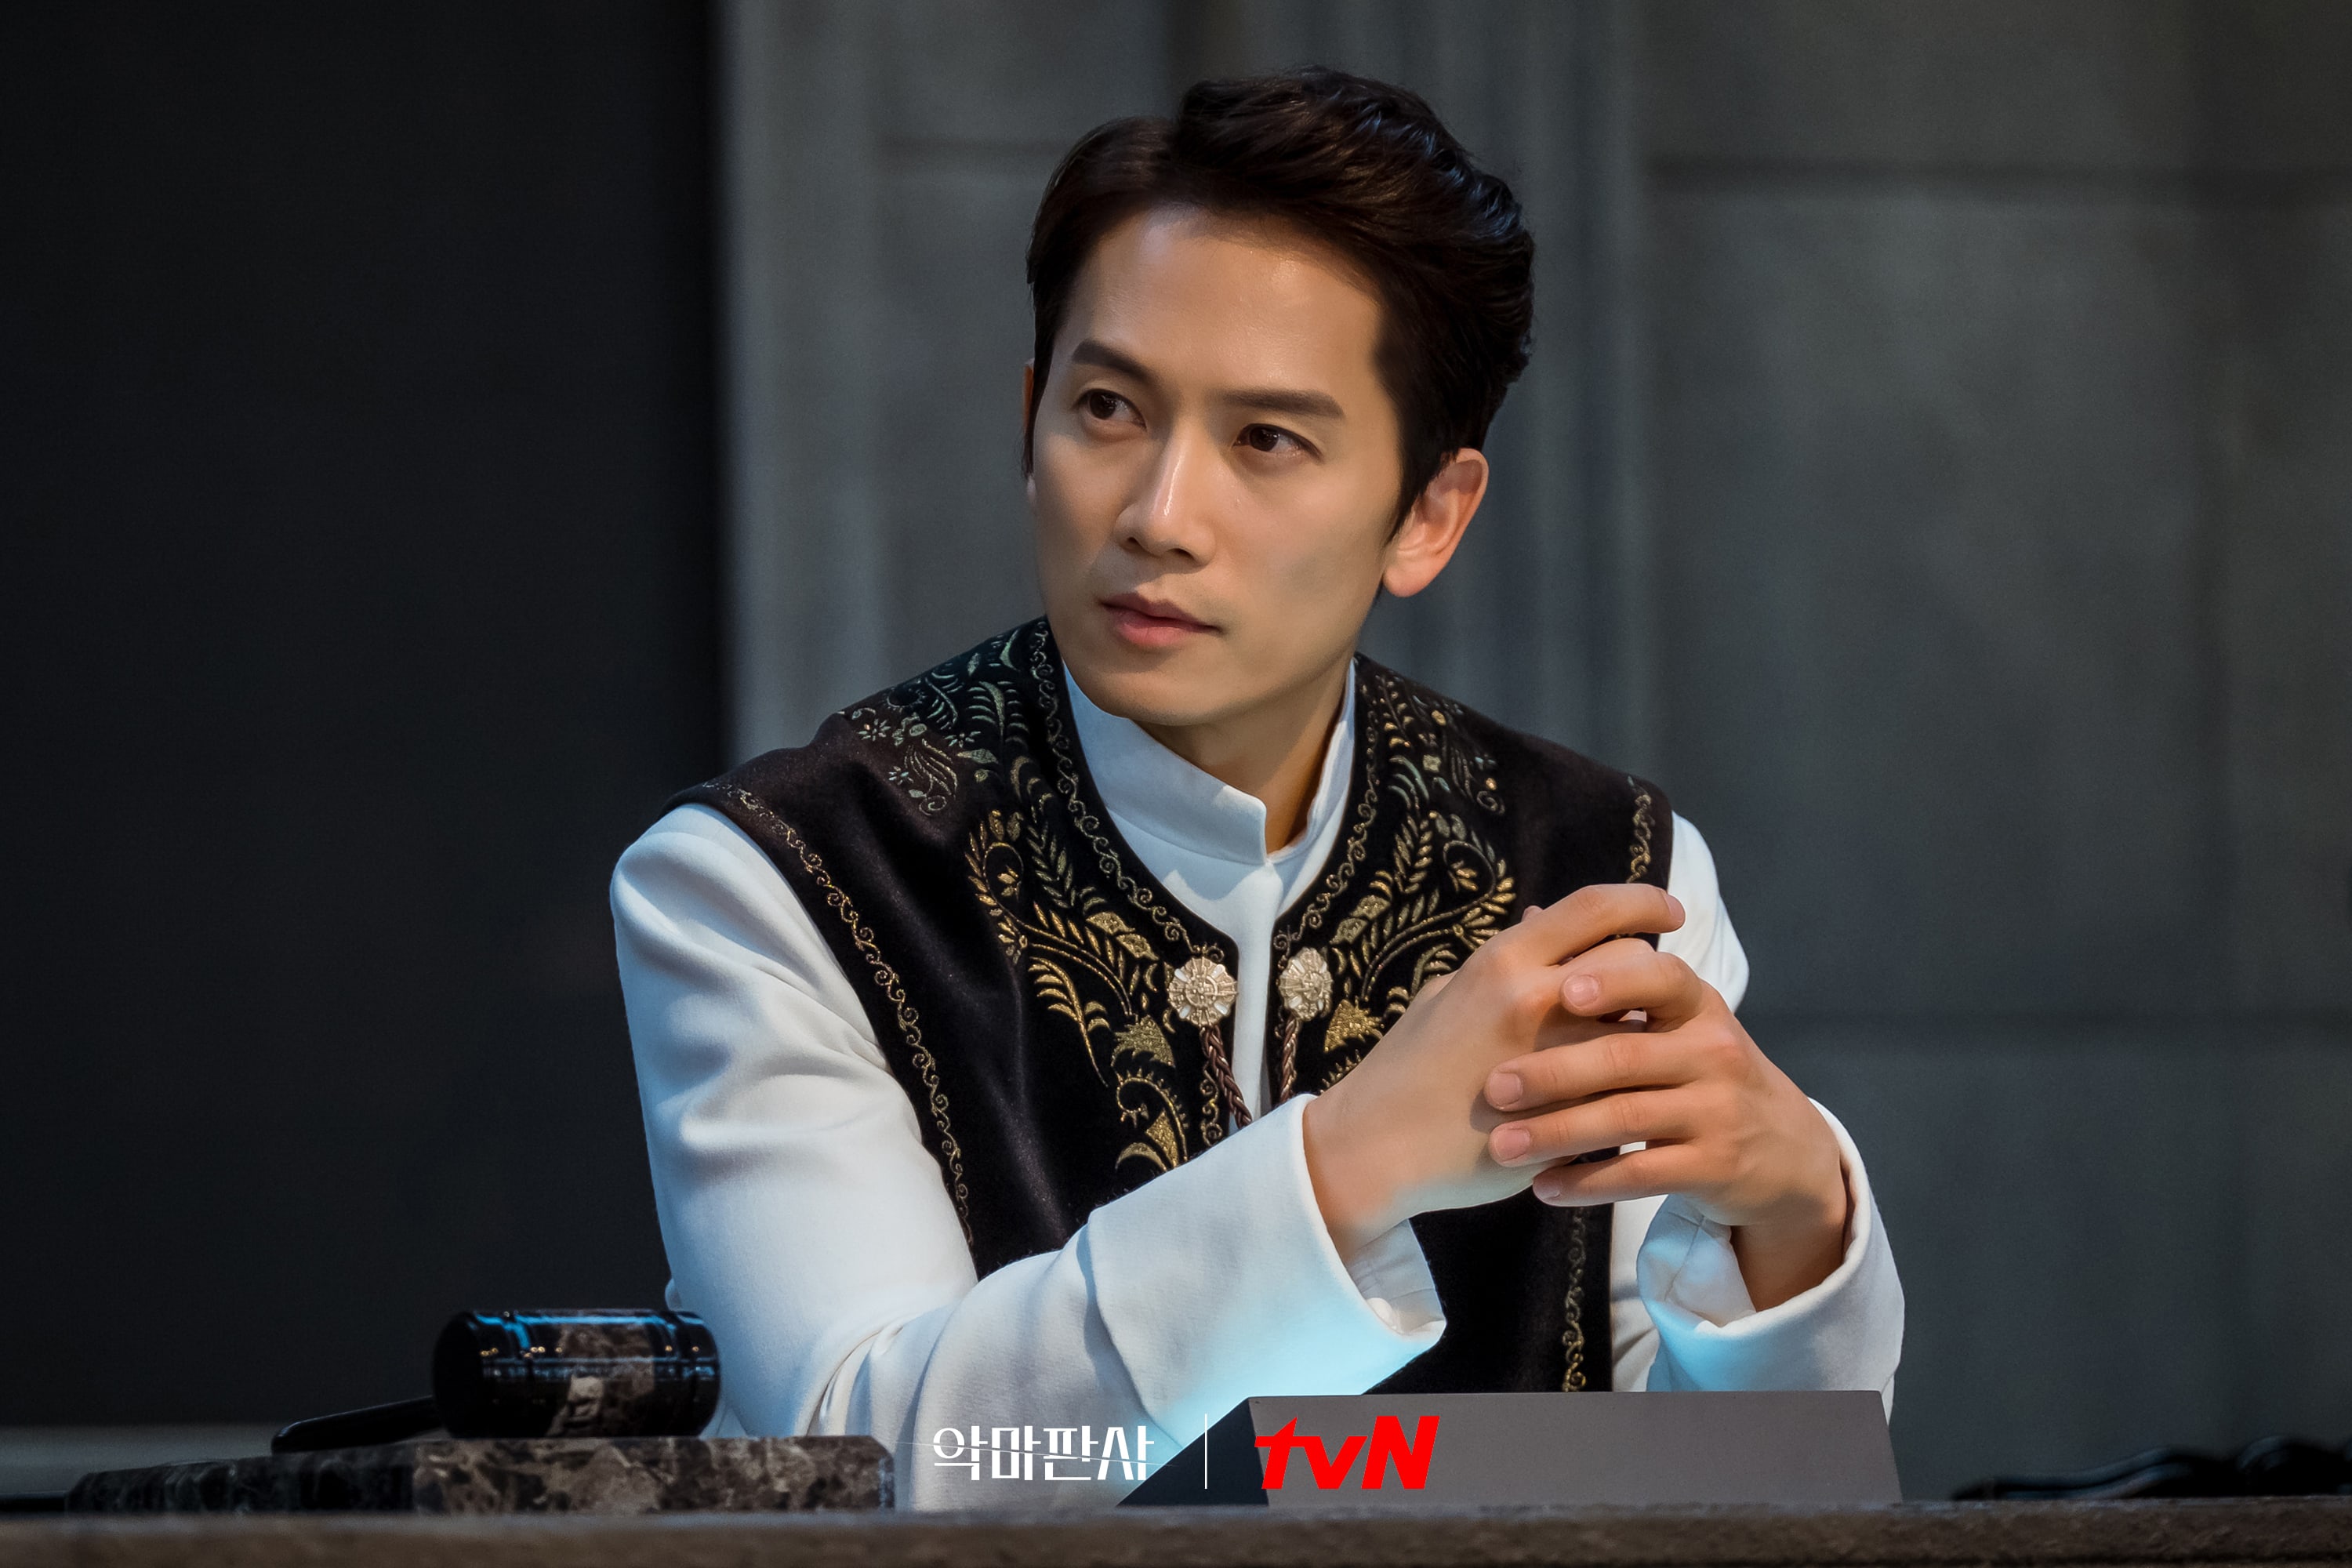 Kang Yo-Han 'The Devil Judge' dressed in judicial robes with hands clapsed together